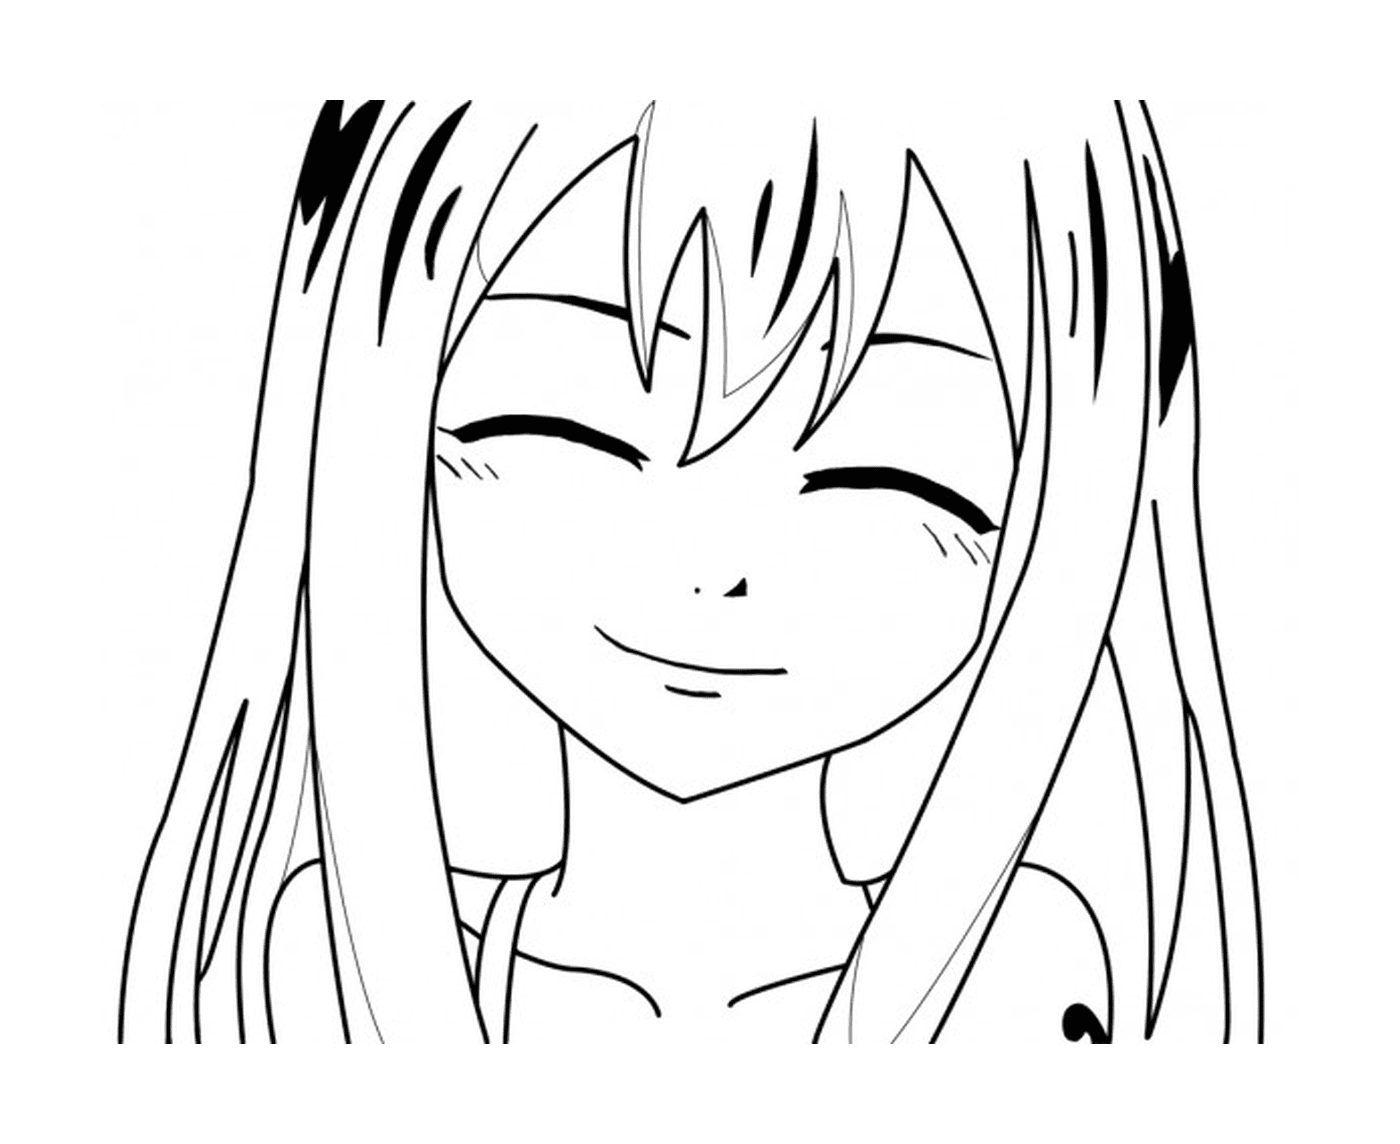  A smiling girl 